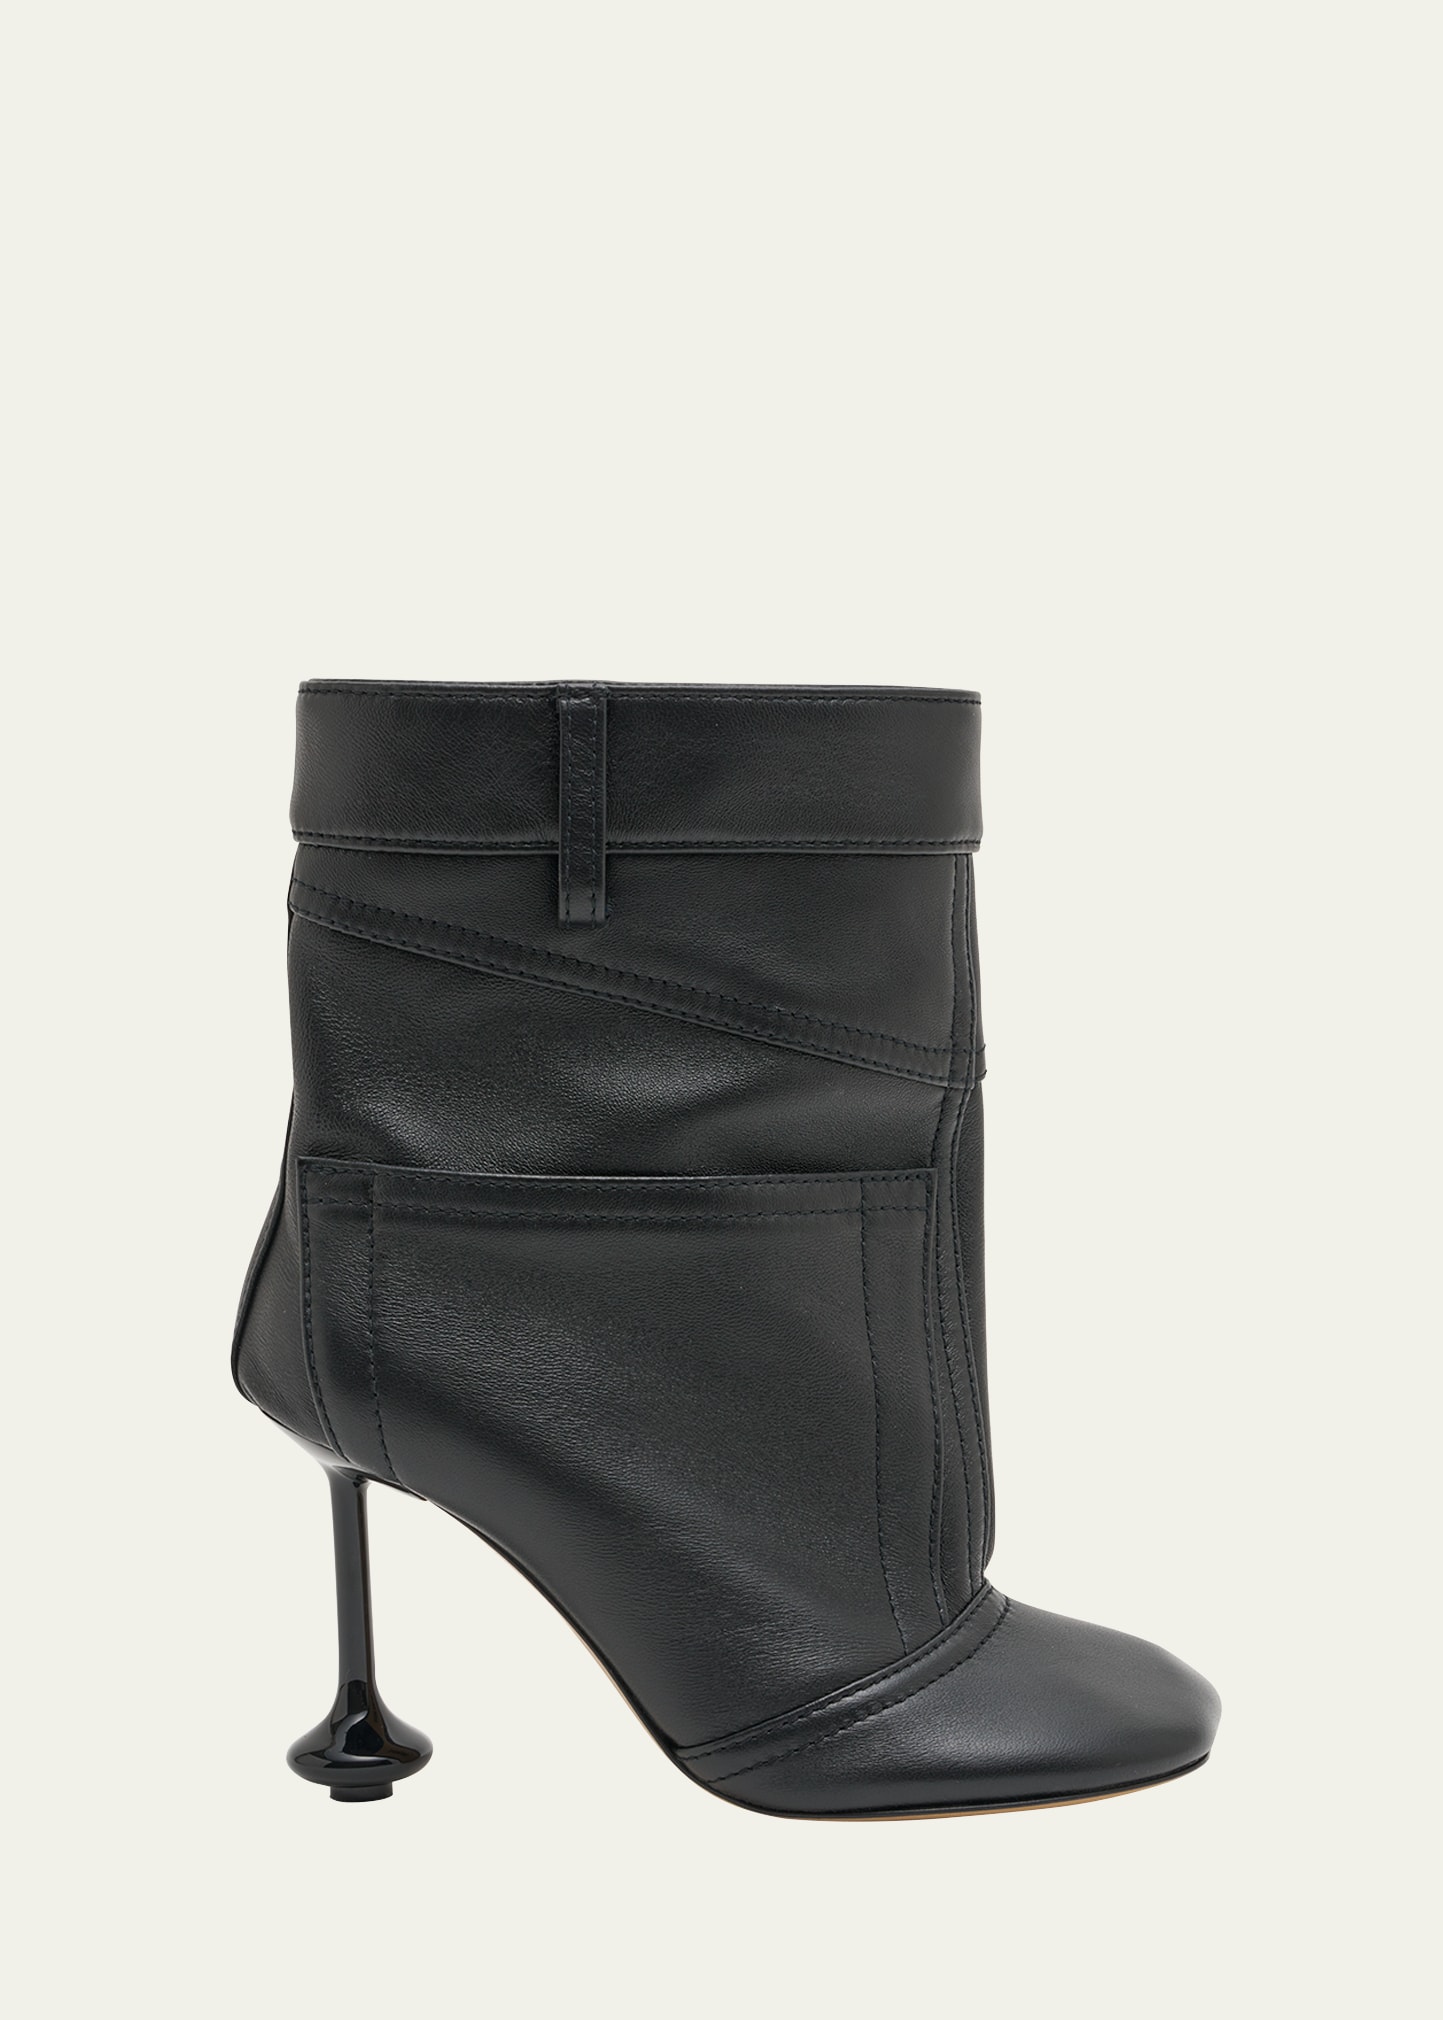 Loewe Toy Panta Stiletto Ankle Boots In Black